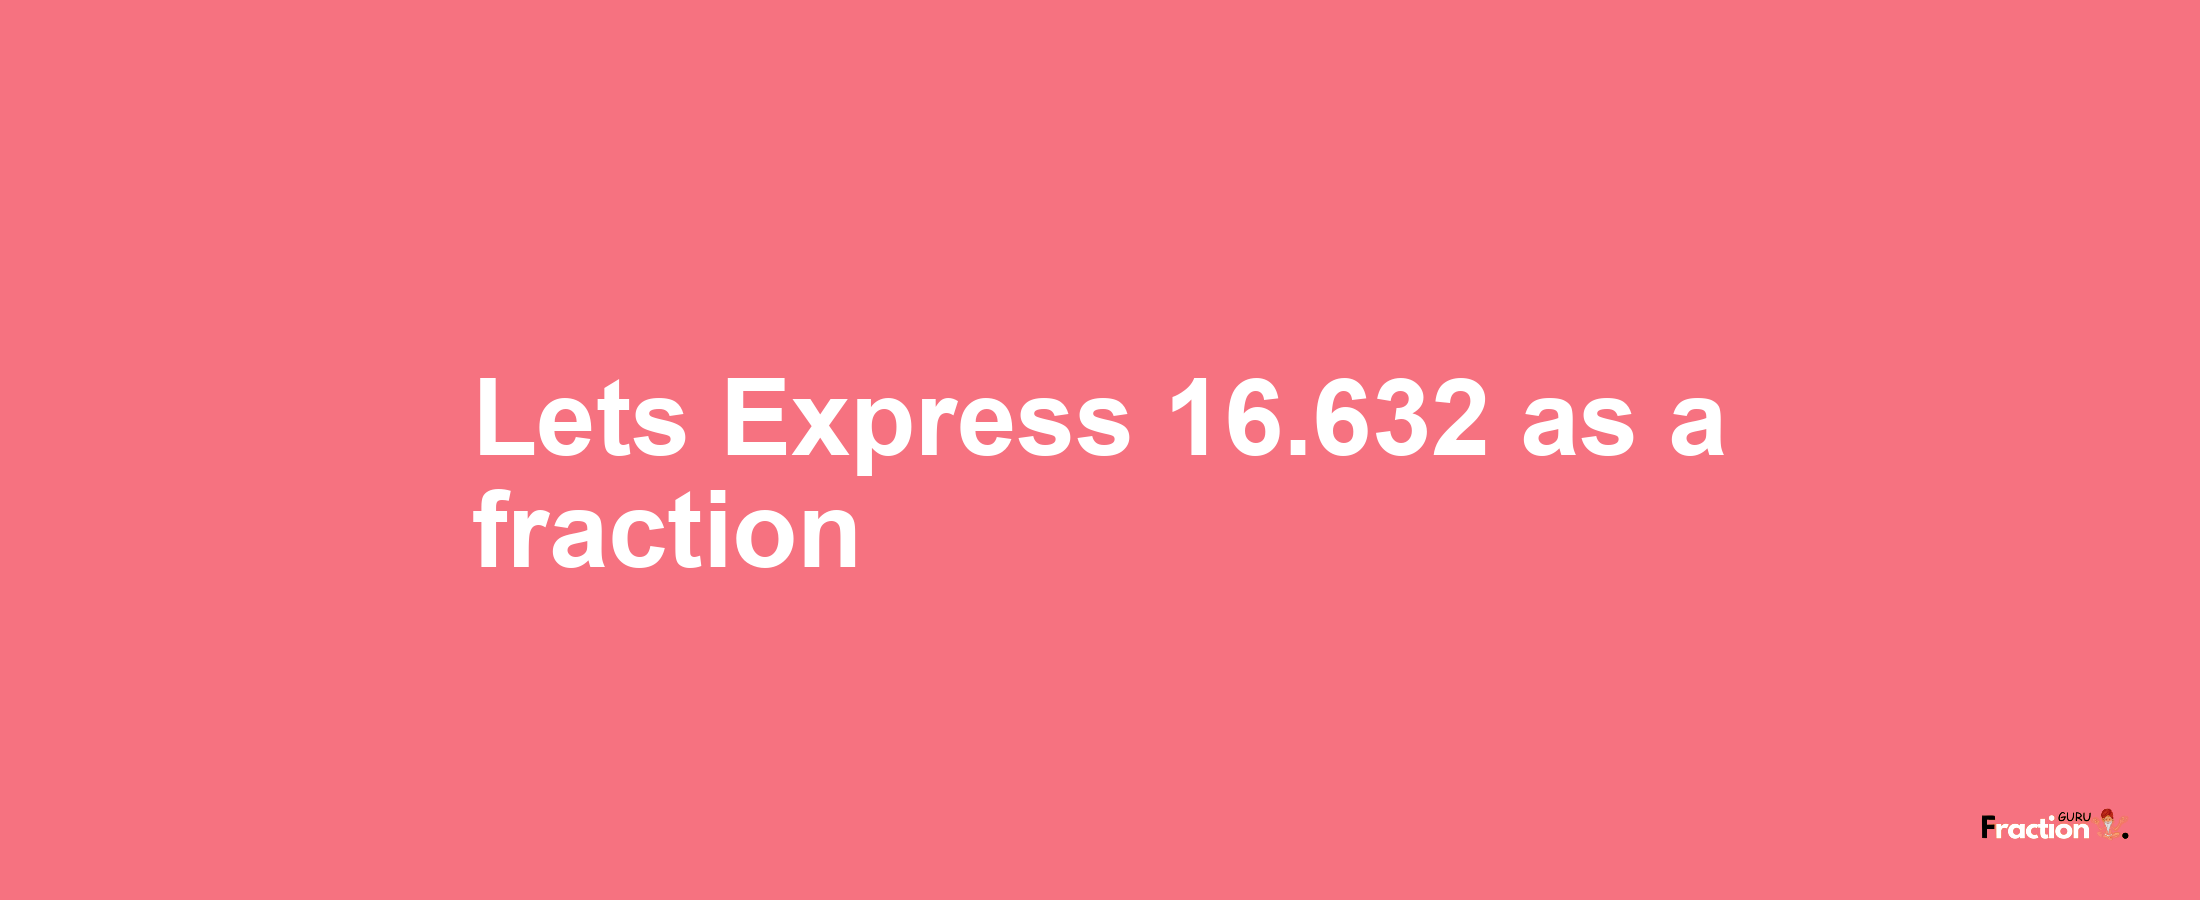 Lets Express 16.632 as afraction